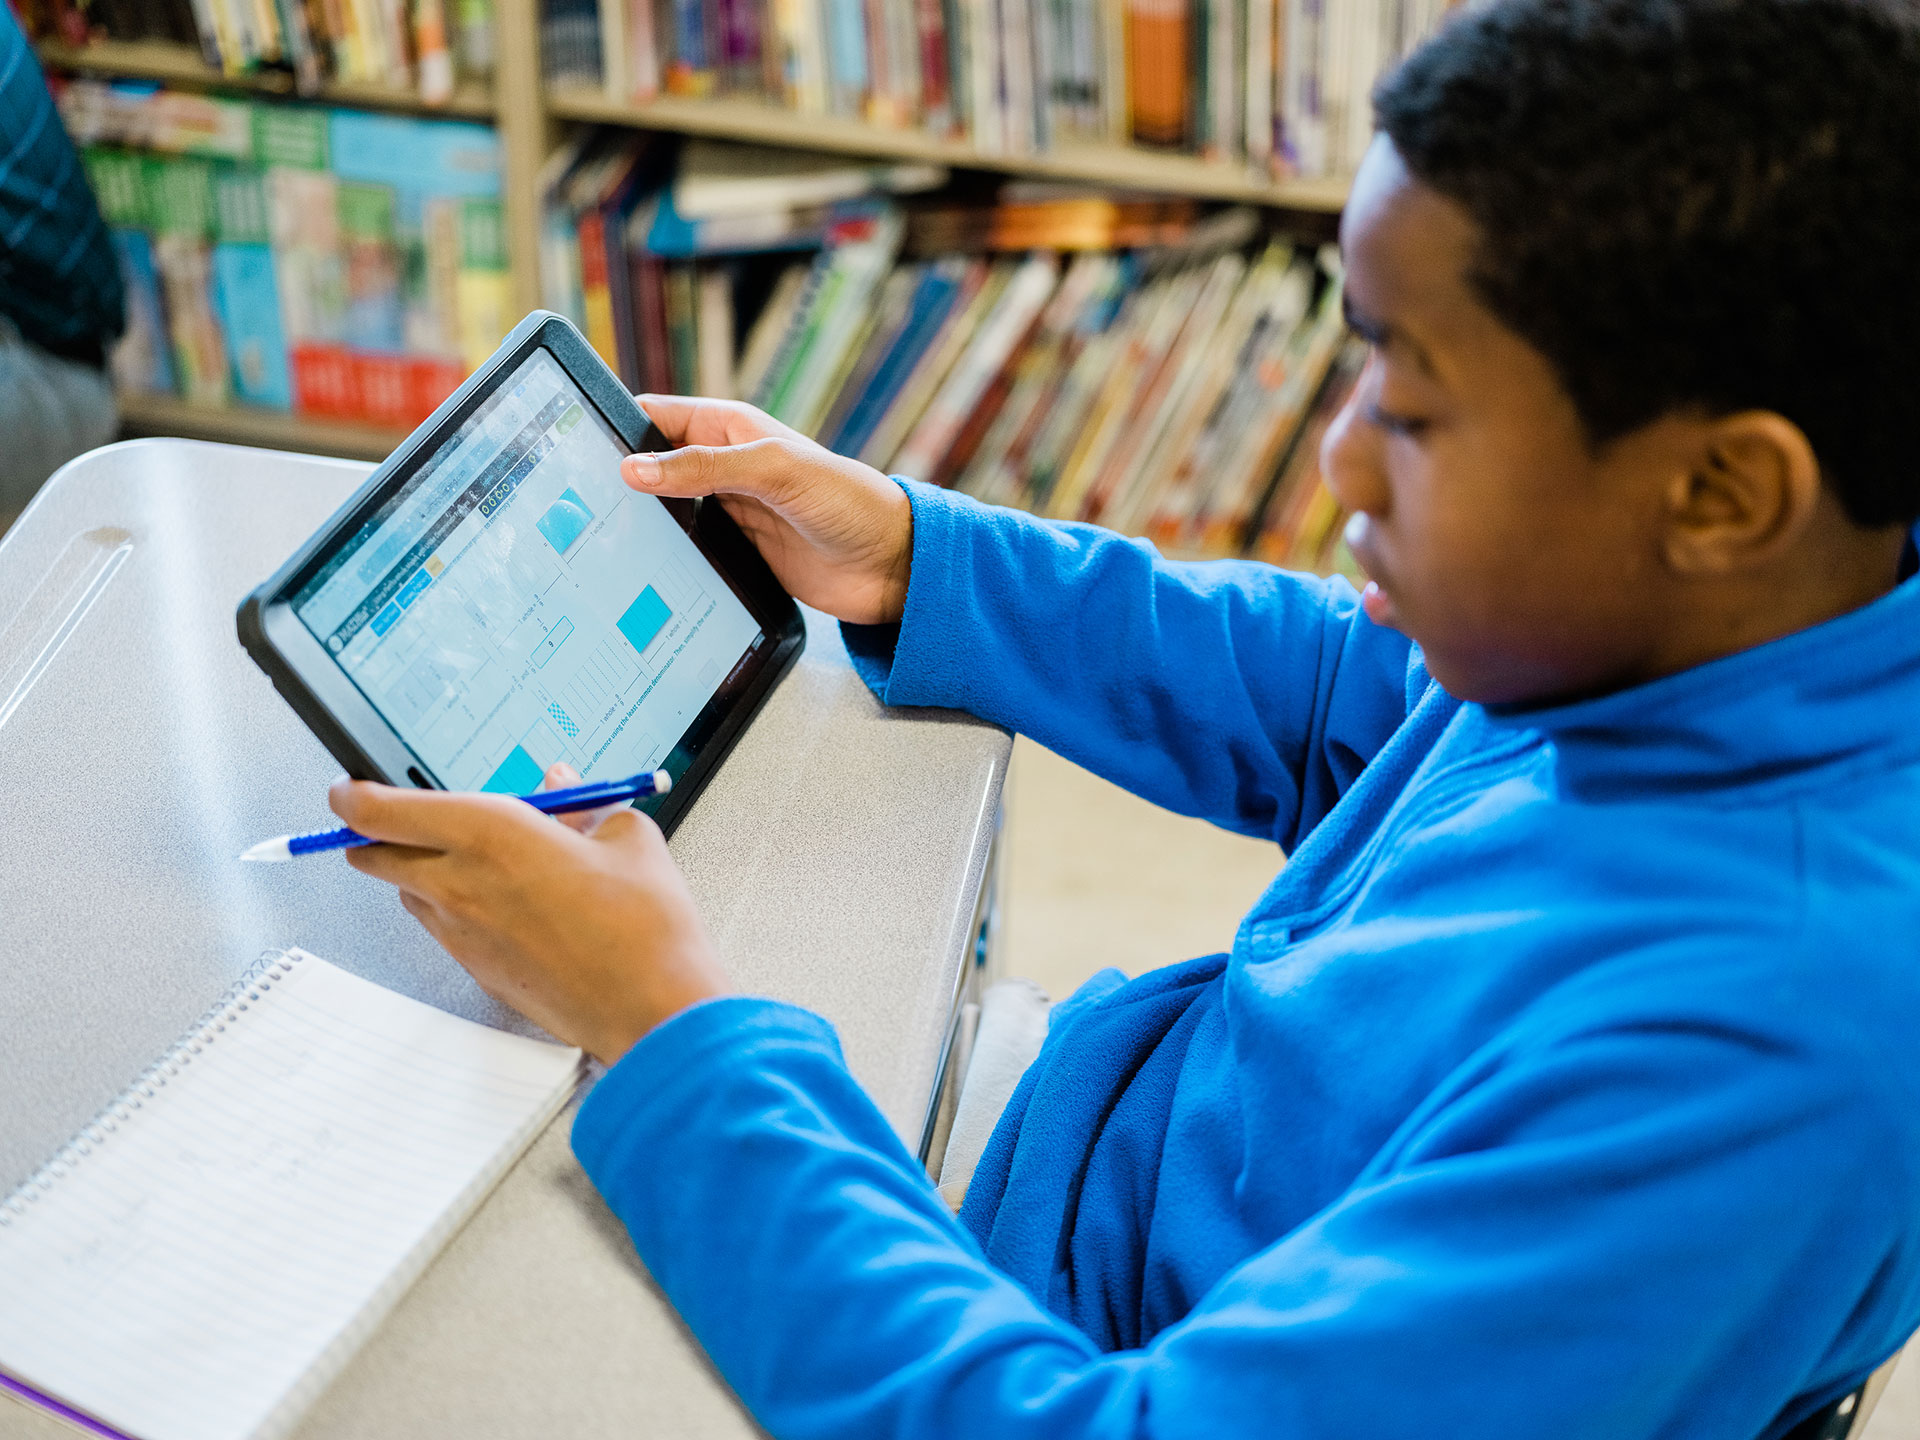 A student at Propel Homestead uses learning software to stretch their math skills. / Photo by Ben Filio